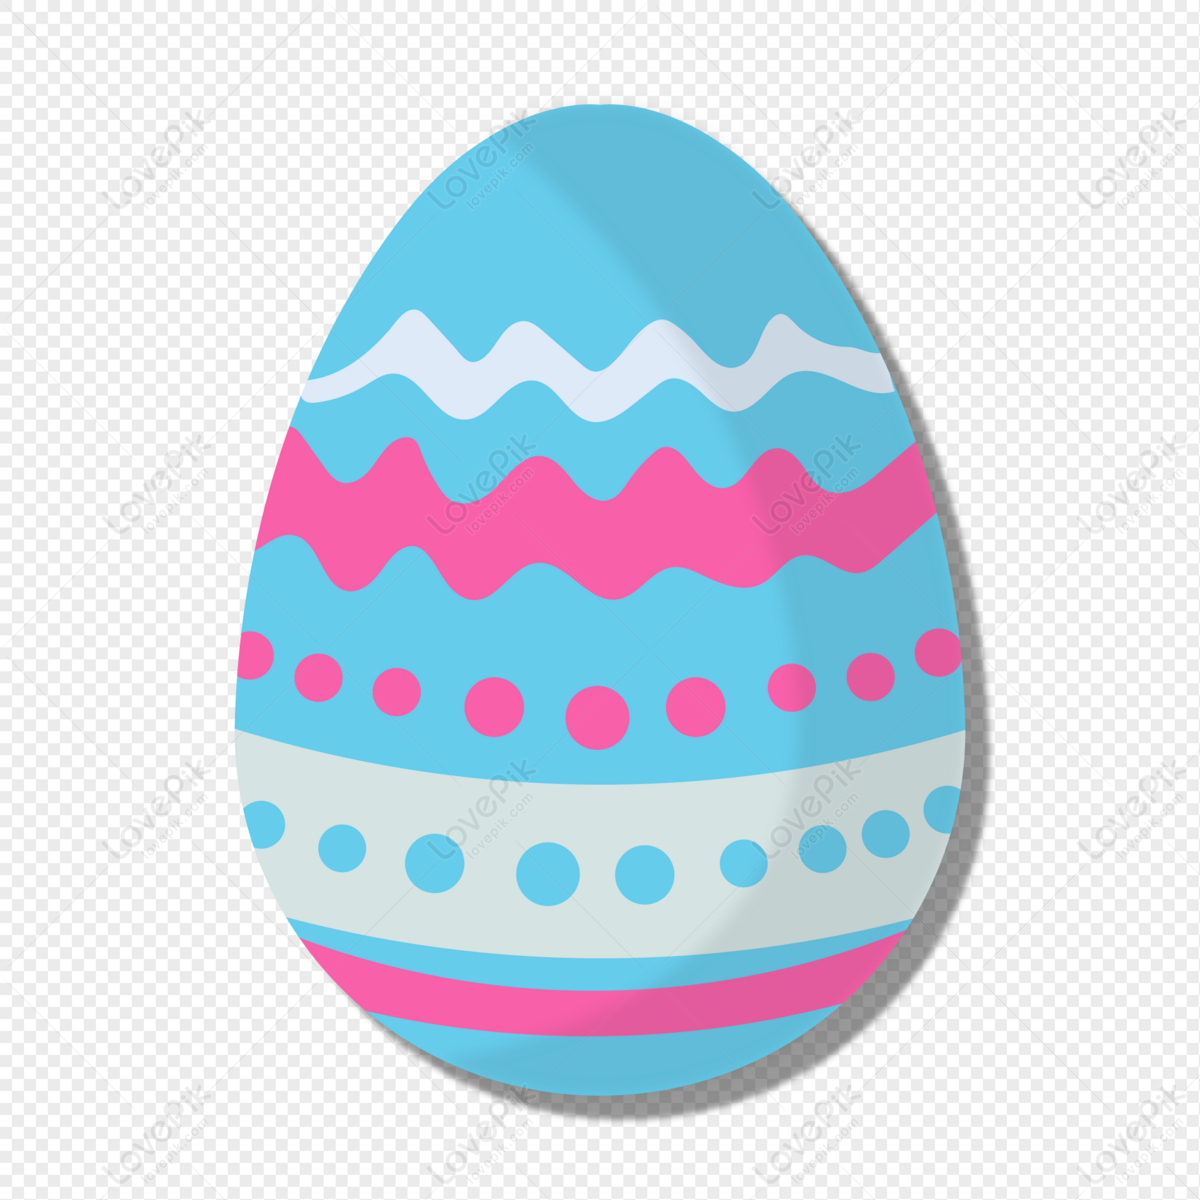 Easter Eggs PNG Transparent And Clipart Image For Free Download - Lovepik |  401011526